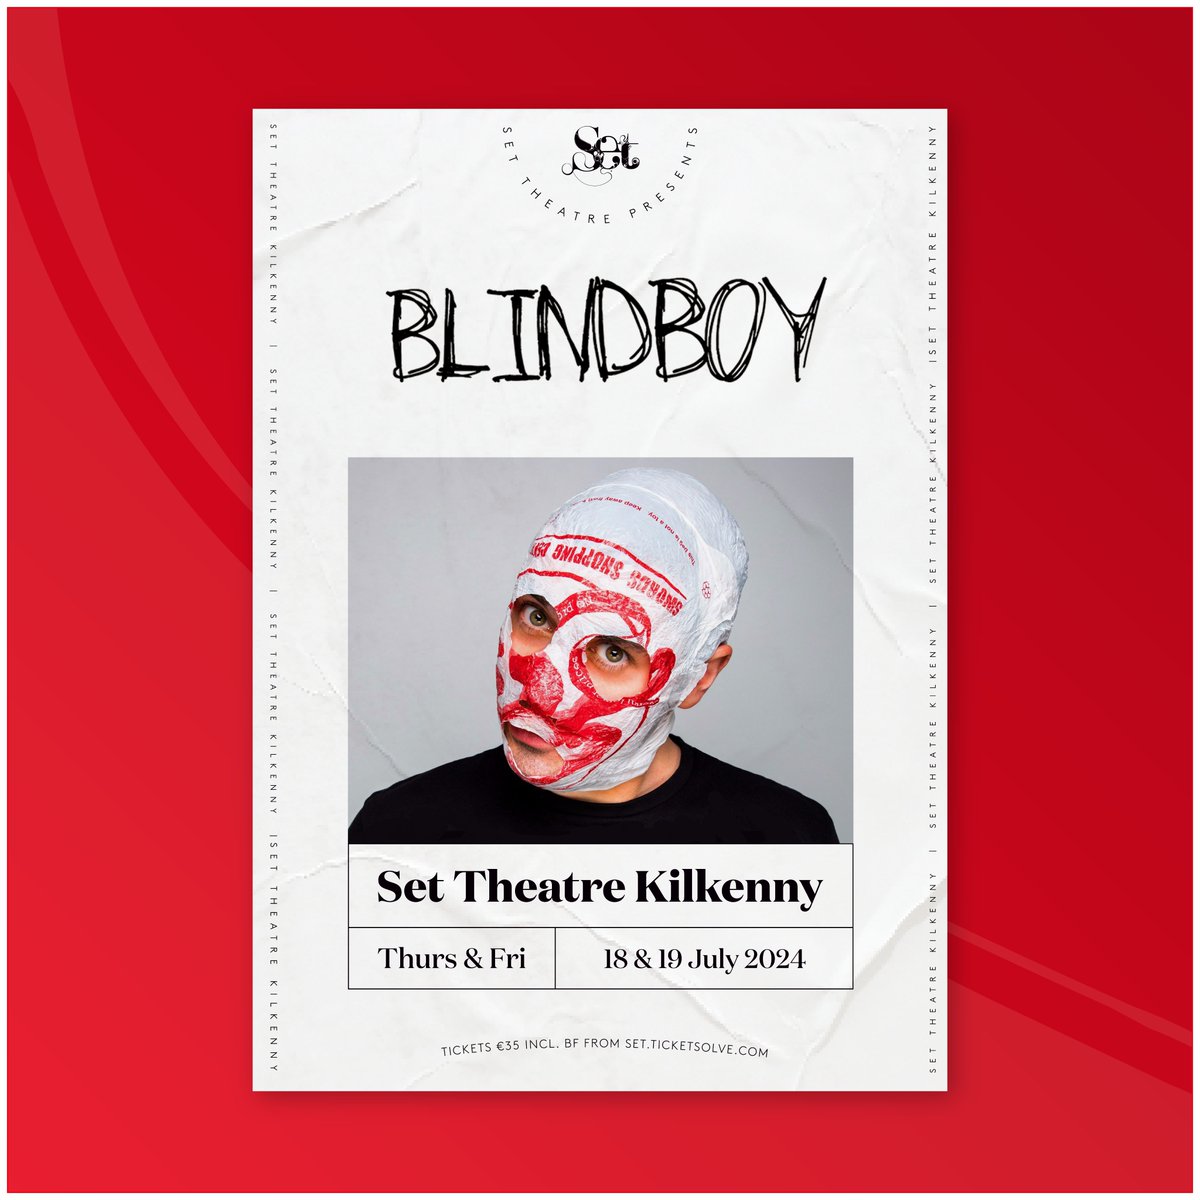 The Blindboy Podcast on Friday 19 July is now Sold Out, but there's still some tickets left for Thursday's show The Blindboy Podcast Thursday 18 July Set Theatre Kilkenny 𝗧𝗜𝗖𝗞𝗘𝗧𝗦 set.ticketsolve.com/shows/11736537…